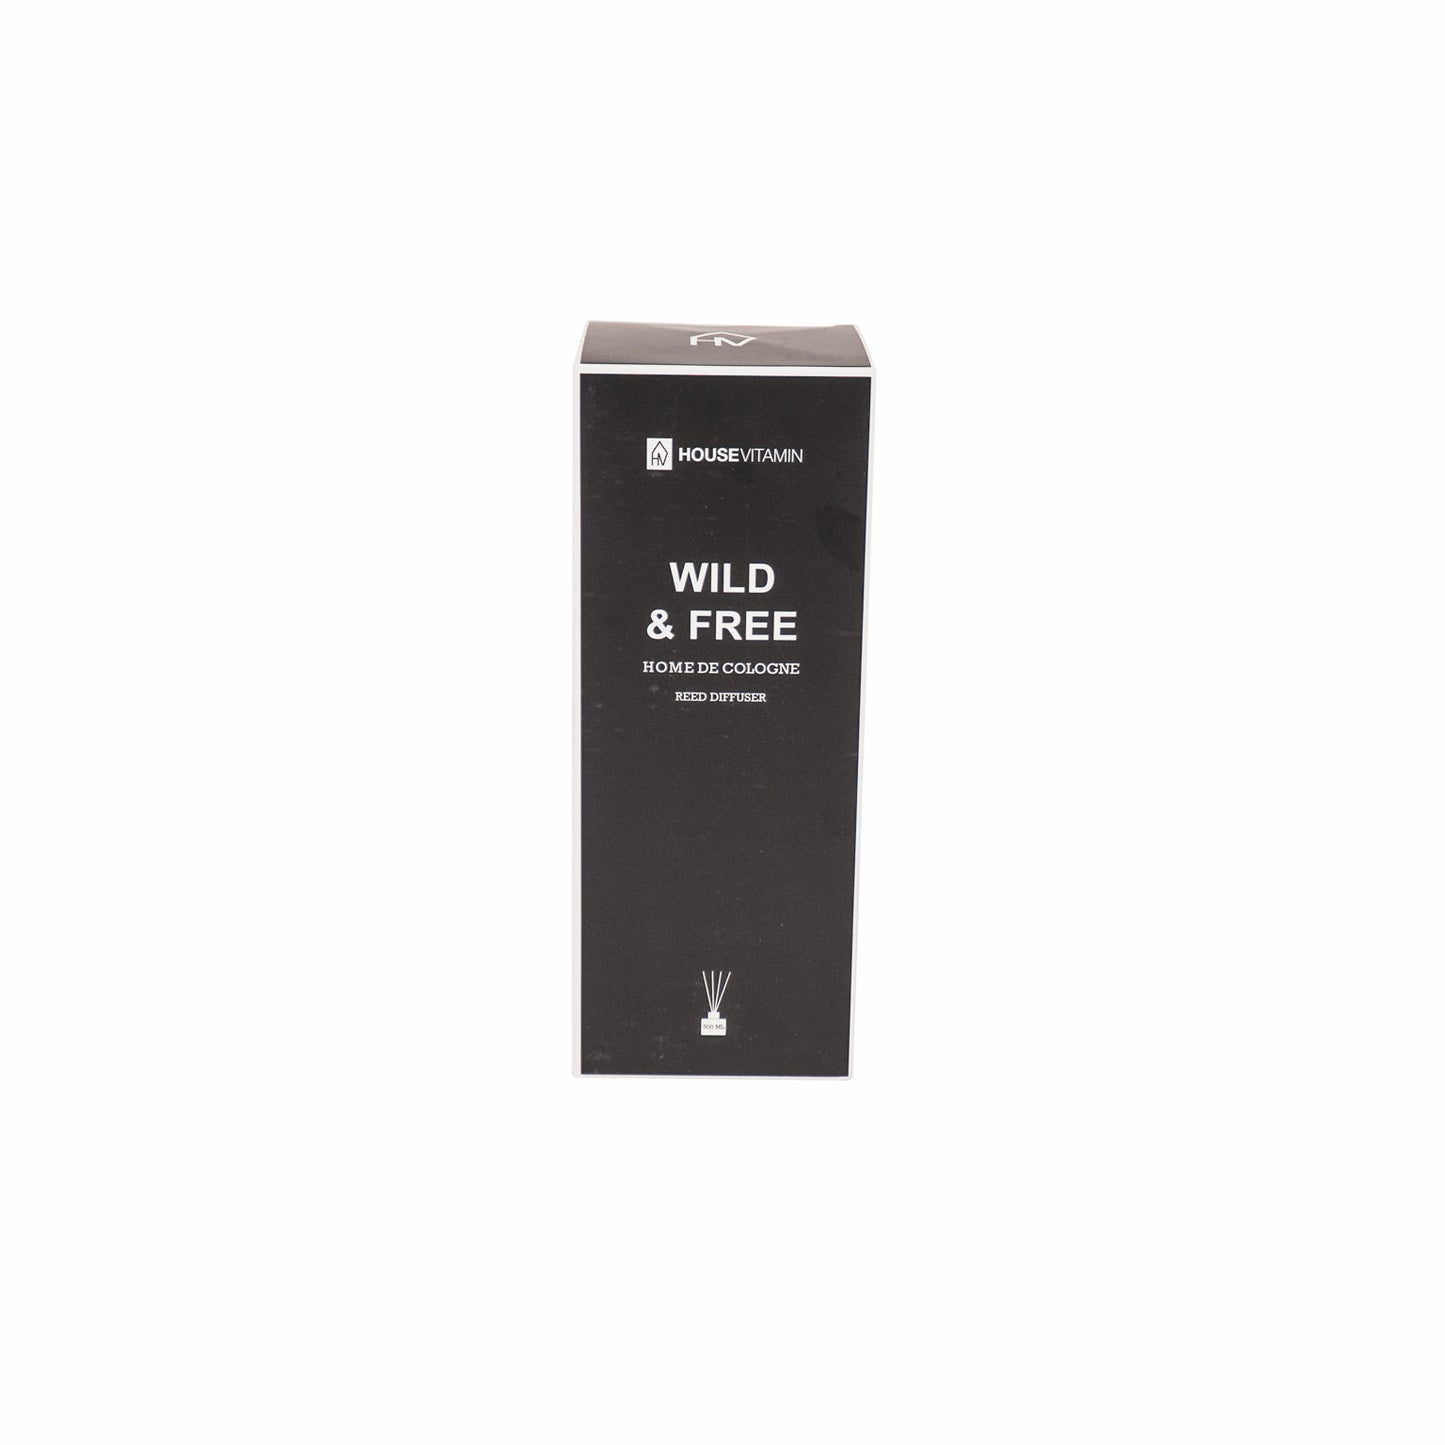 Housevitamin Home de Cologne Geurstokjes - 500 ml - Wild and free